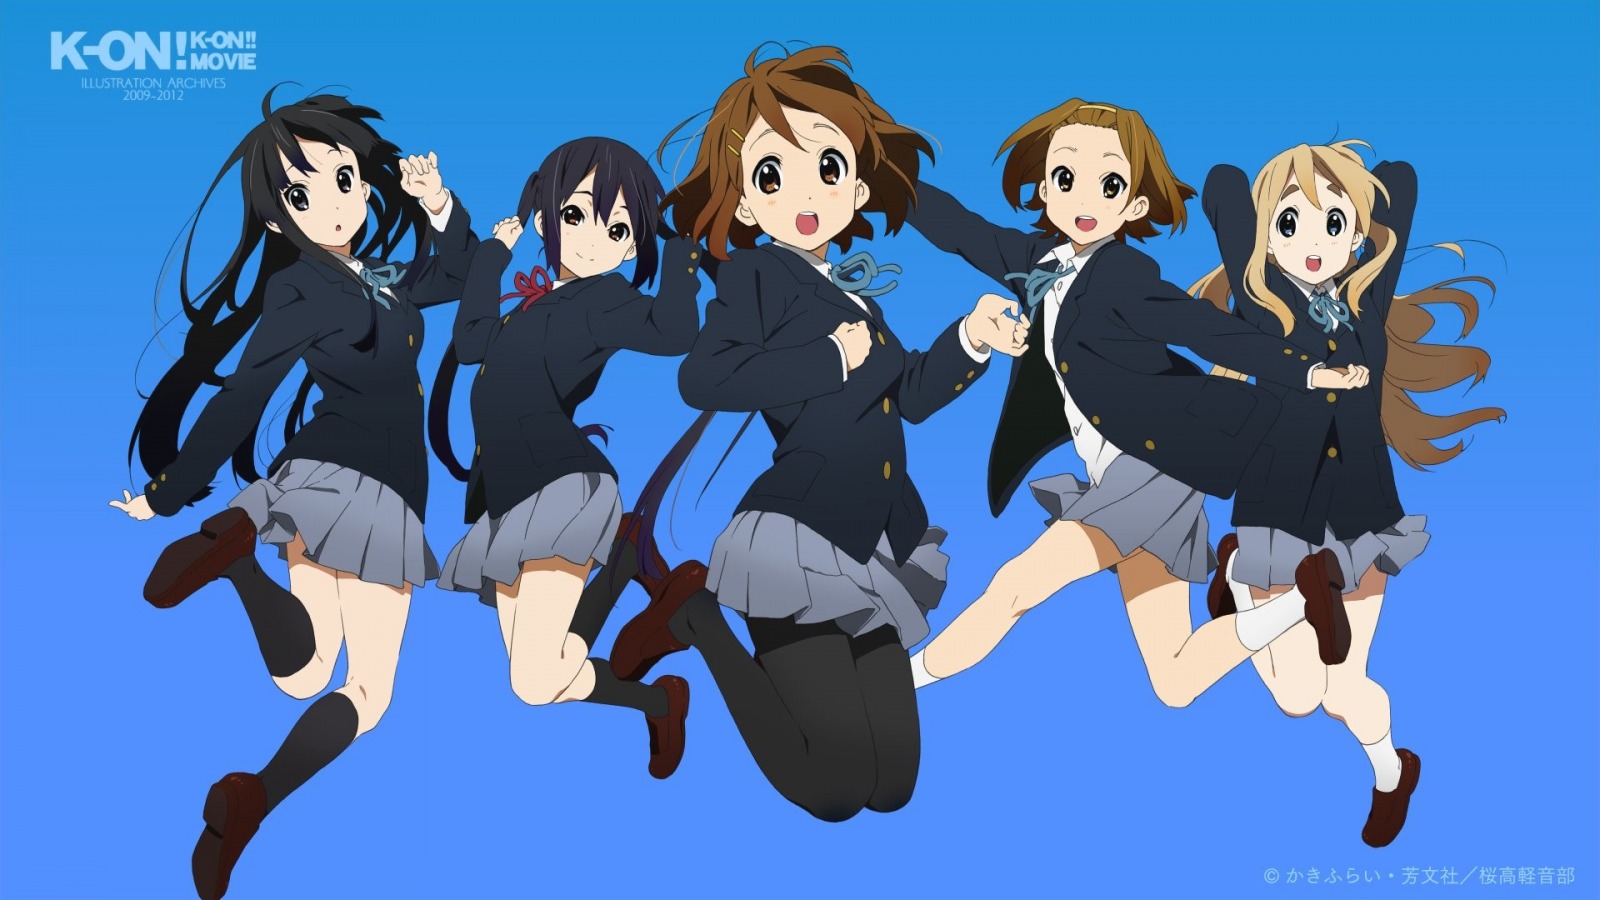 K-ON! IILUSTRATION ARCHIEVES 2009-2012 P.3 [P6]